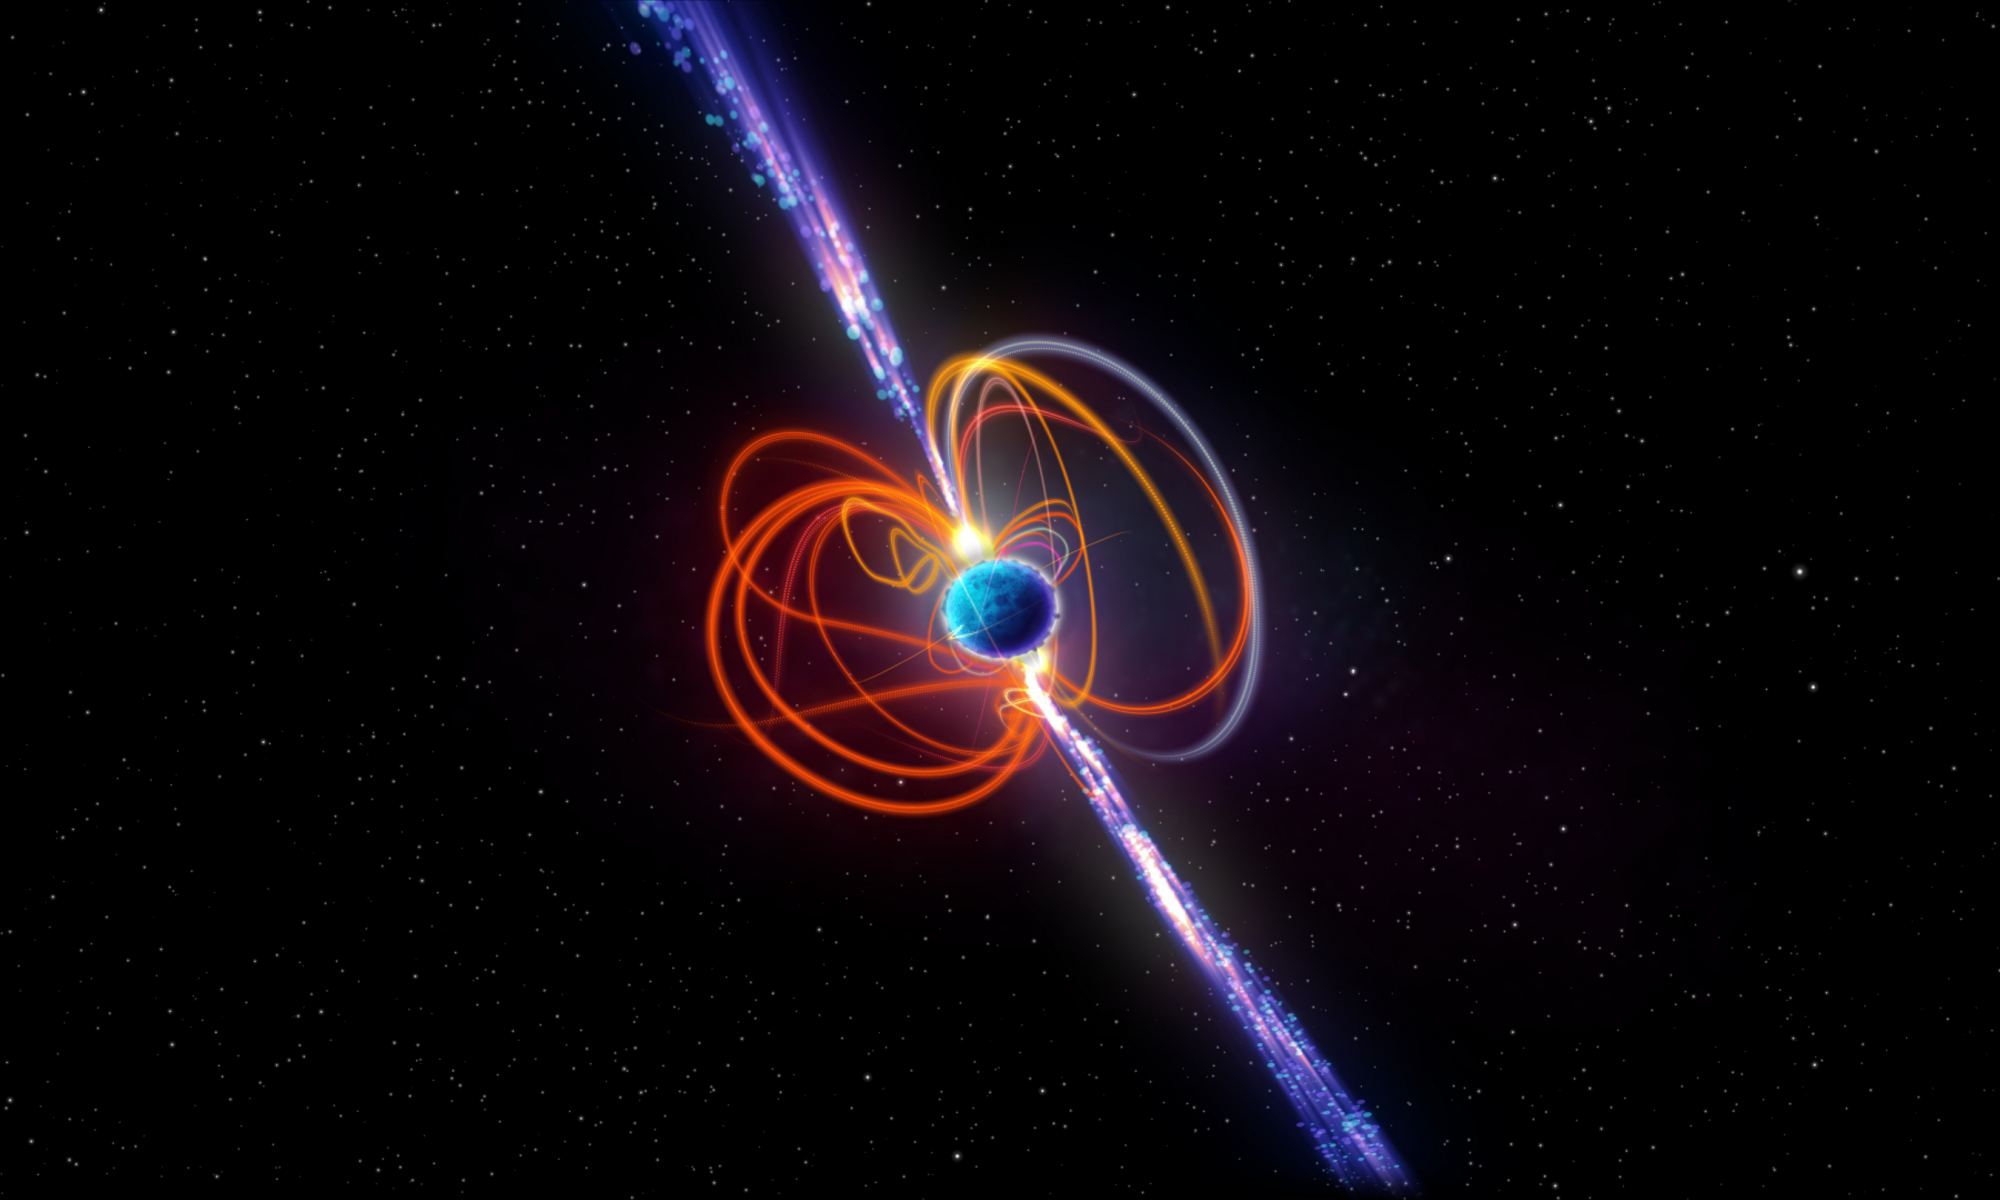 Record-Breaking Magnetar was There in the Data All Along